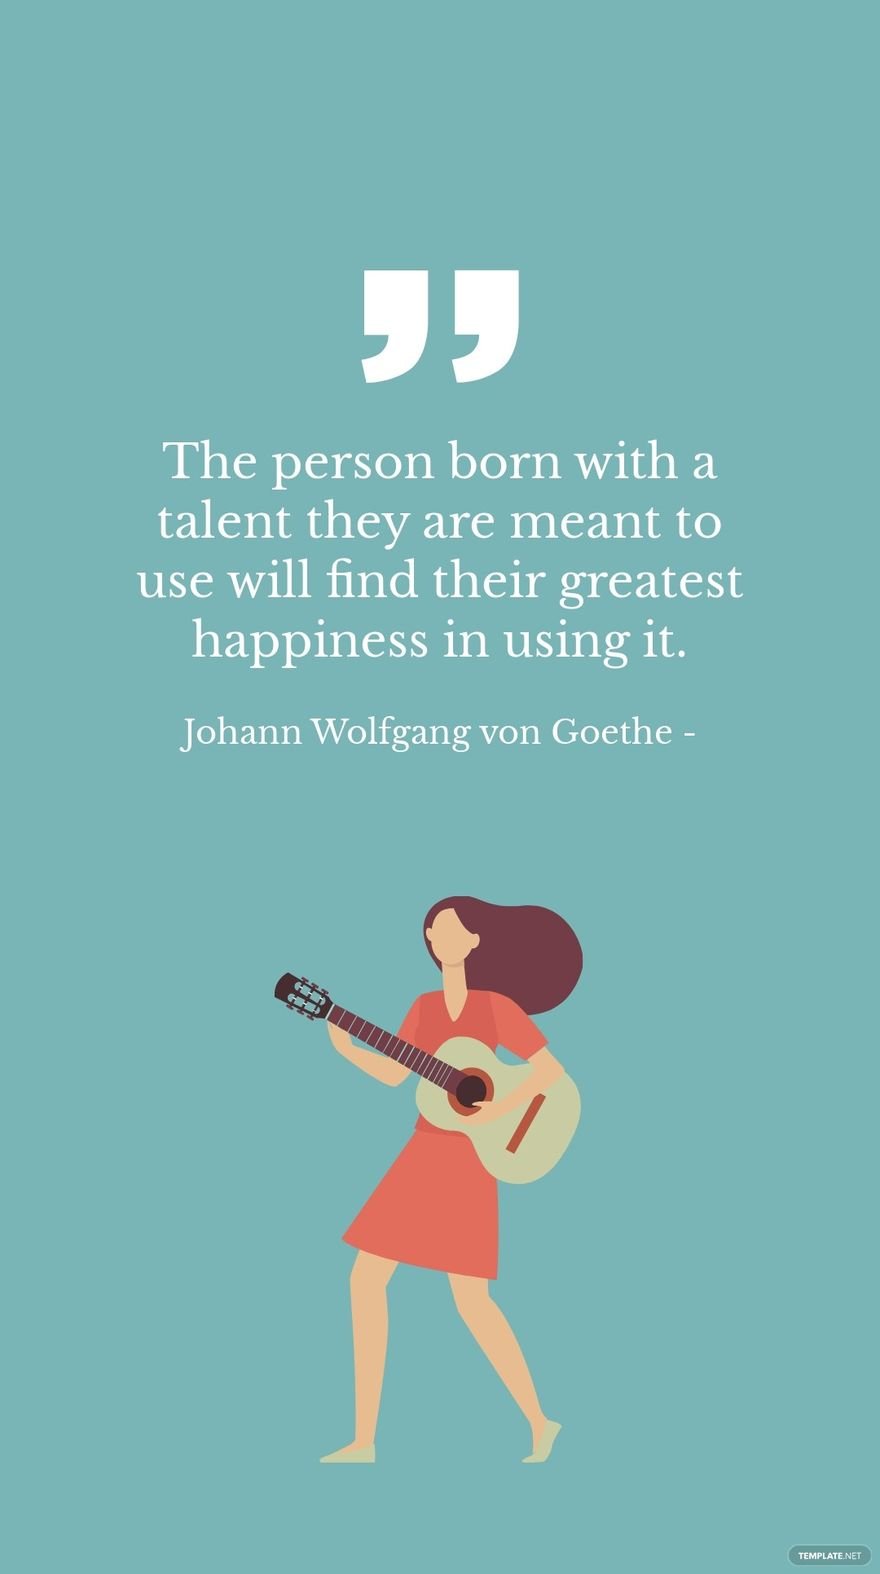 Free Johann Wolfgang von Goethe - The person born with a talent they are meant to use will find their greatest happiness in using it. in JPG